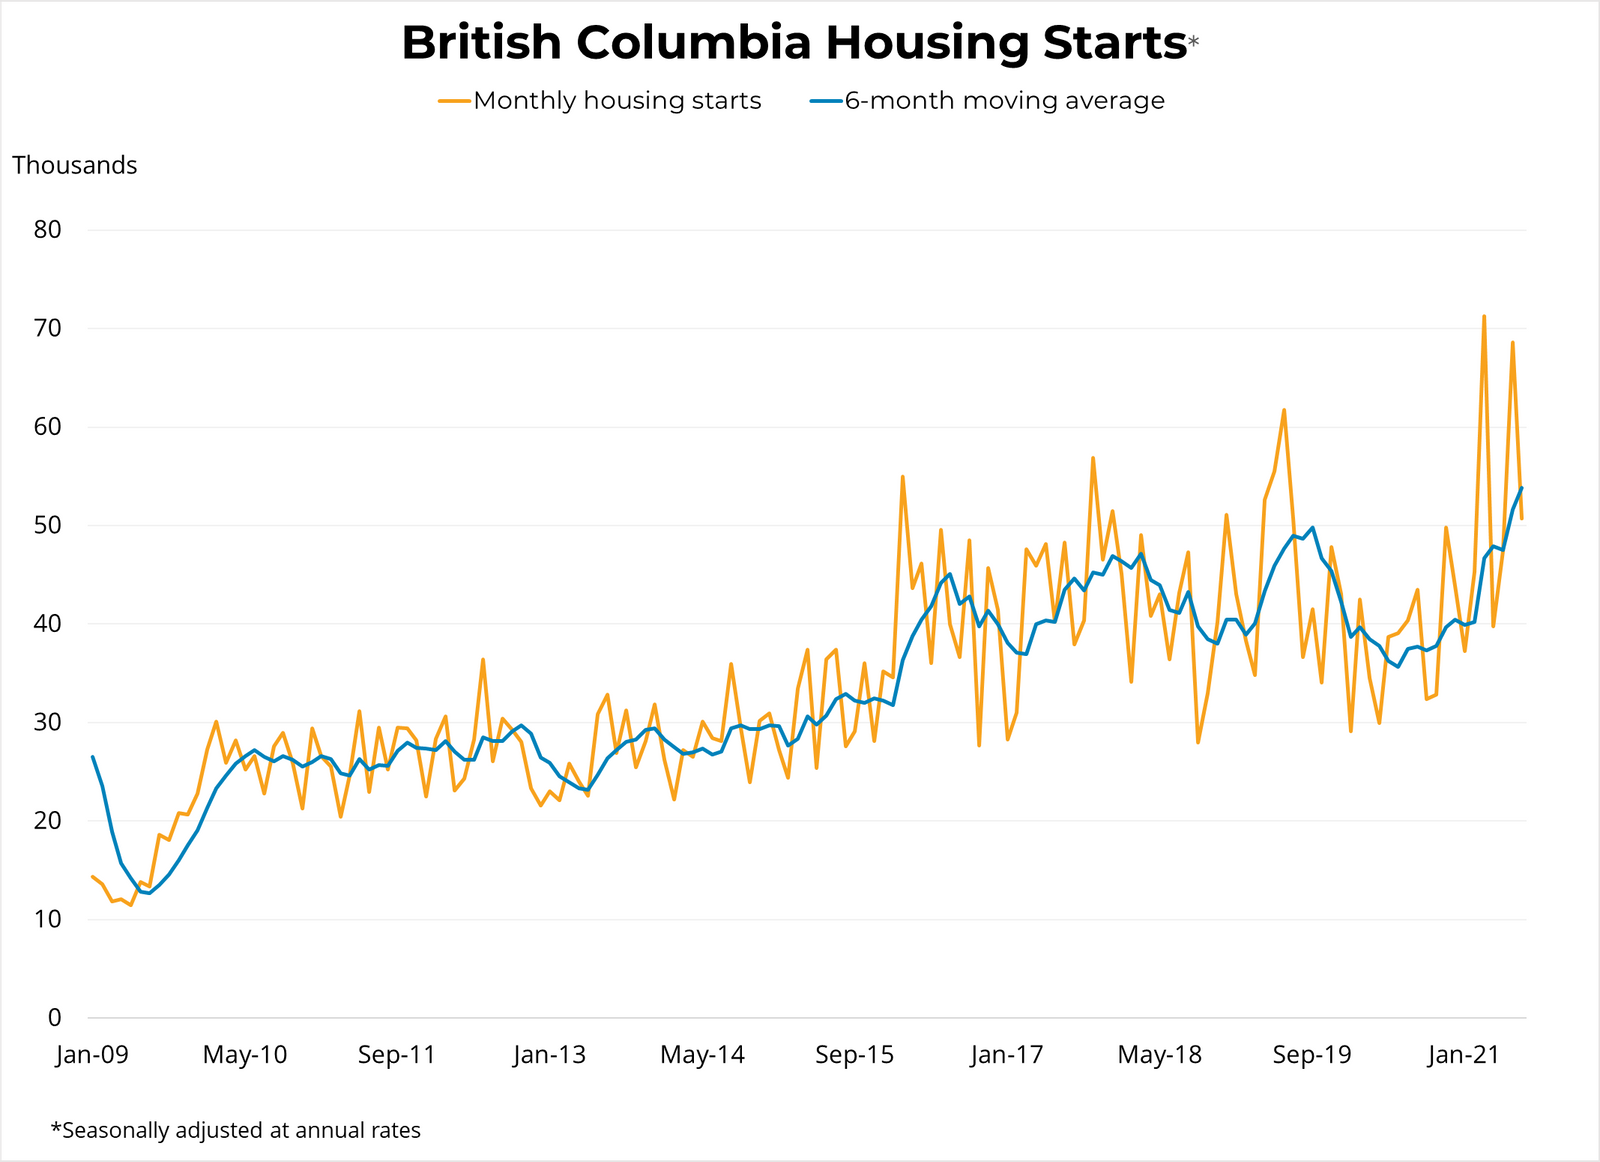 Canadian Housing Starts (July 2021) - August 17, 2021